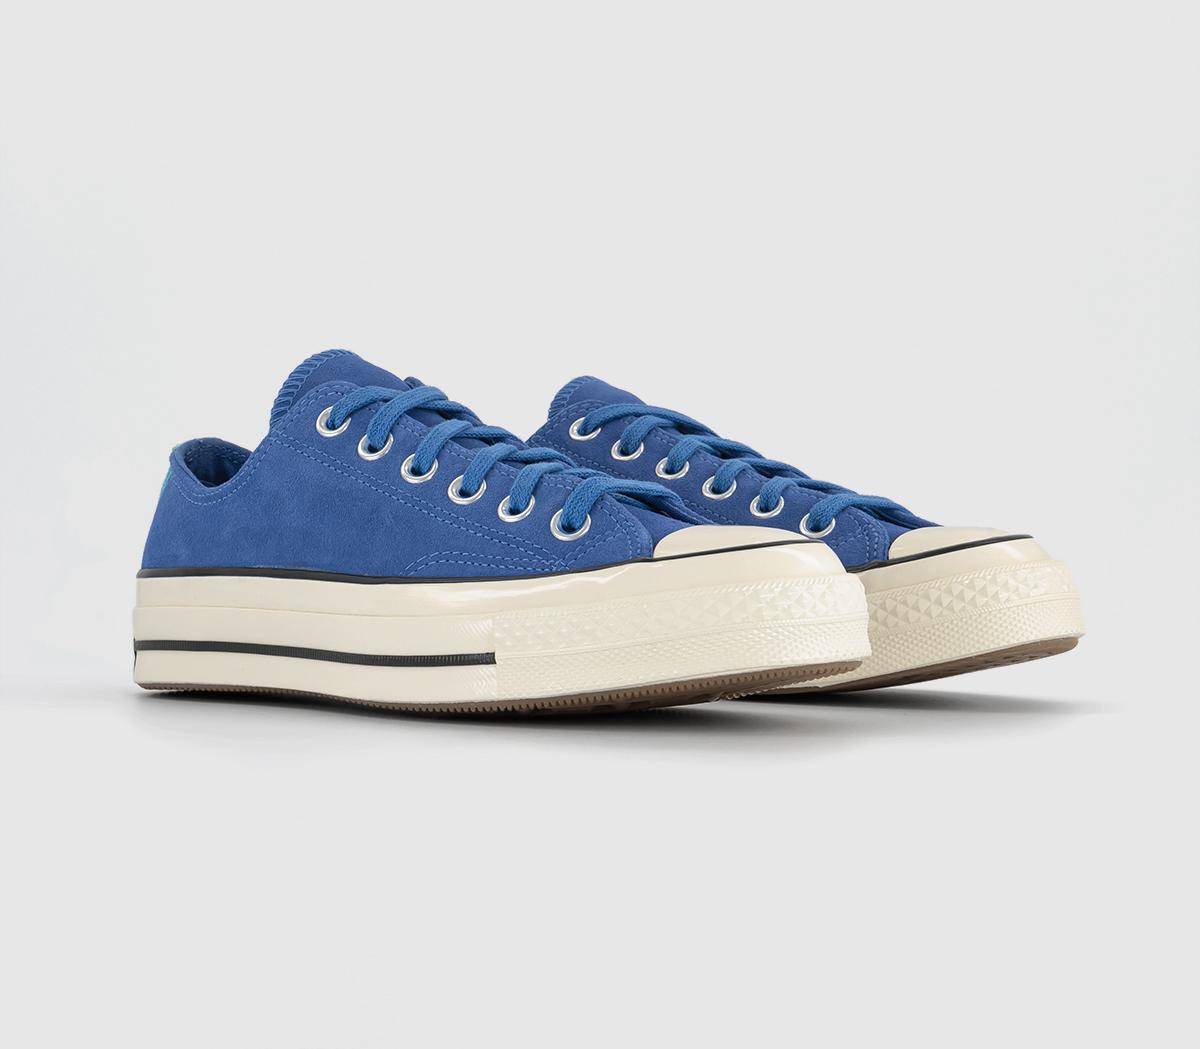 Converse All Star Ox 70s Trainers Ancestral Blue Egret Black, 4.5